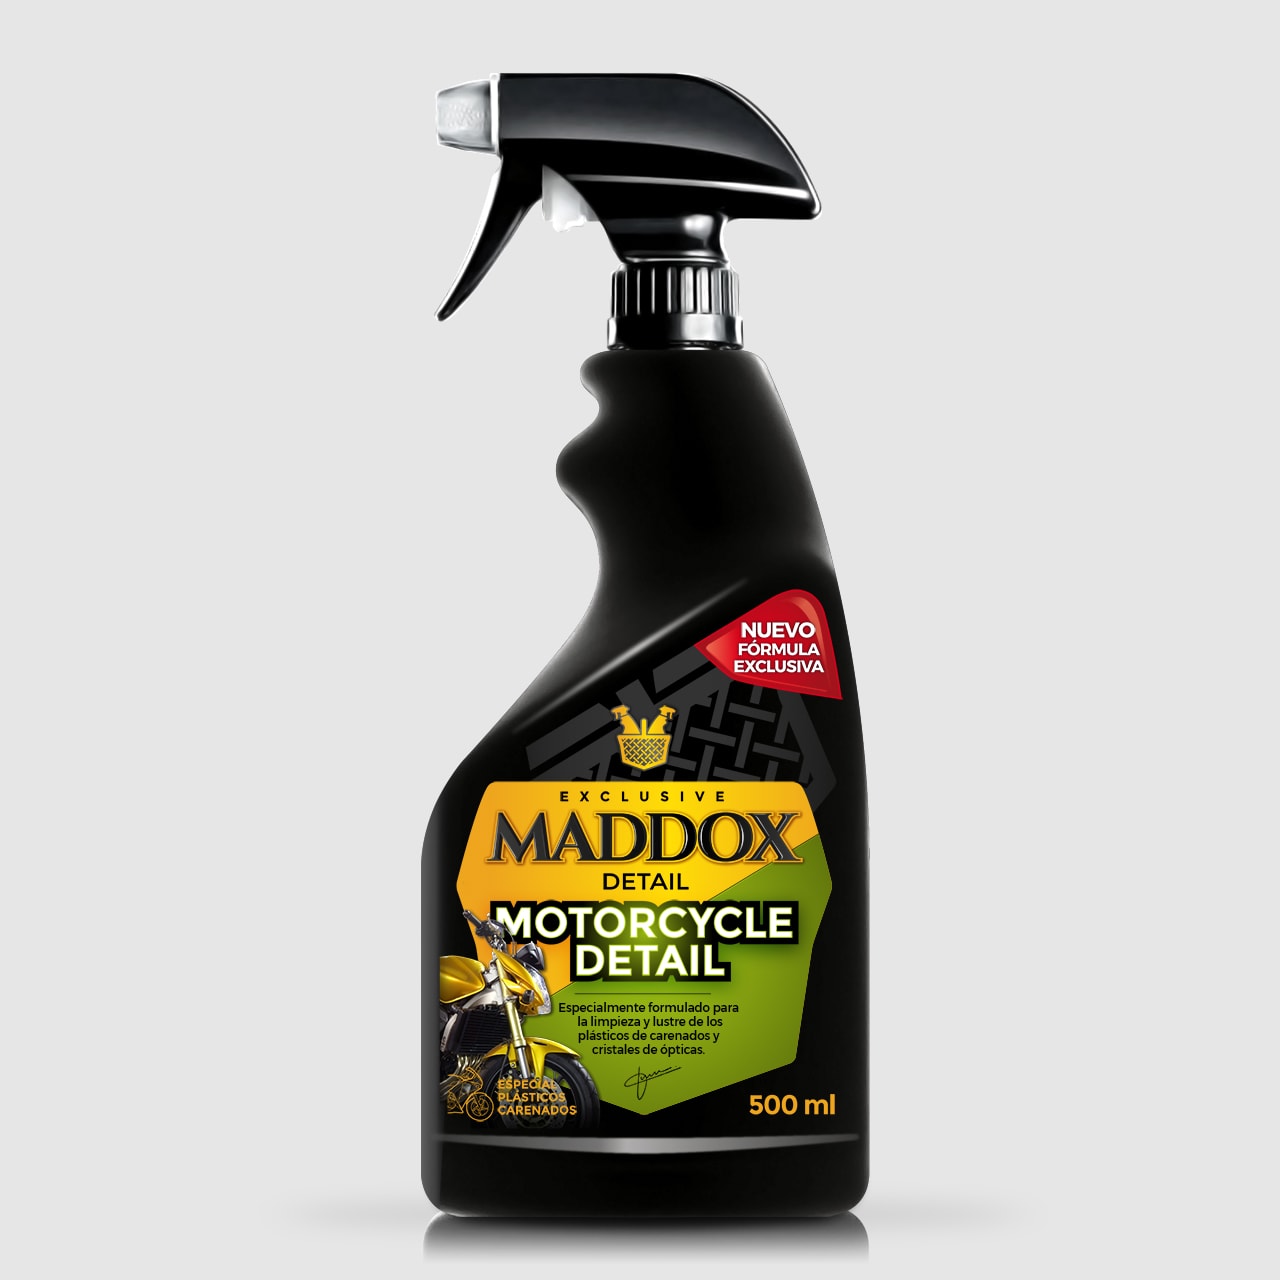 https://maddoxdetail.com/wp-content/uploads/2023/03/maddox-detail-motorcycle-detail.jpg